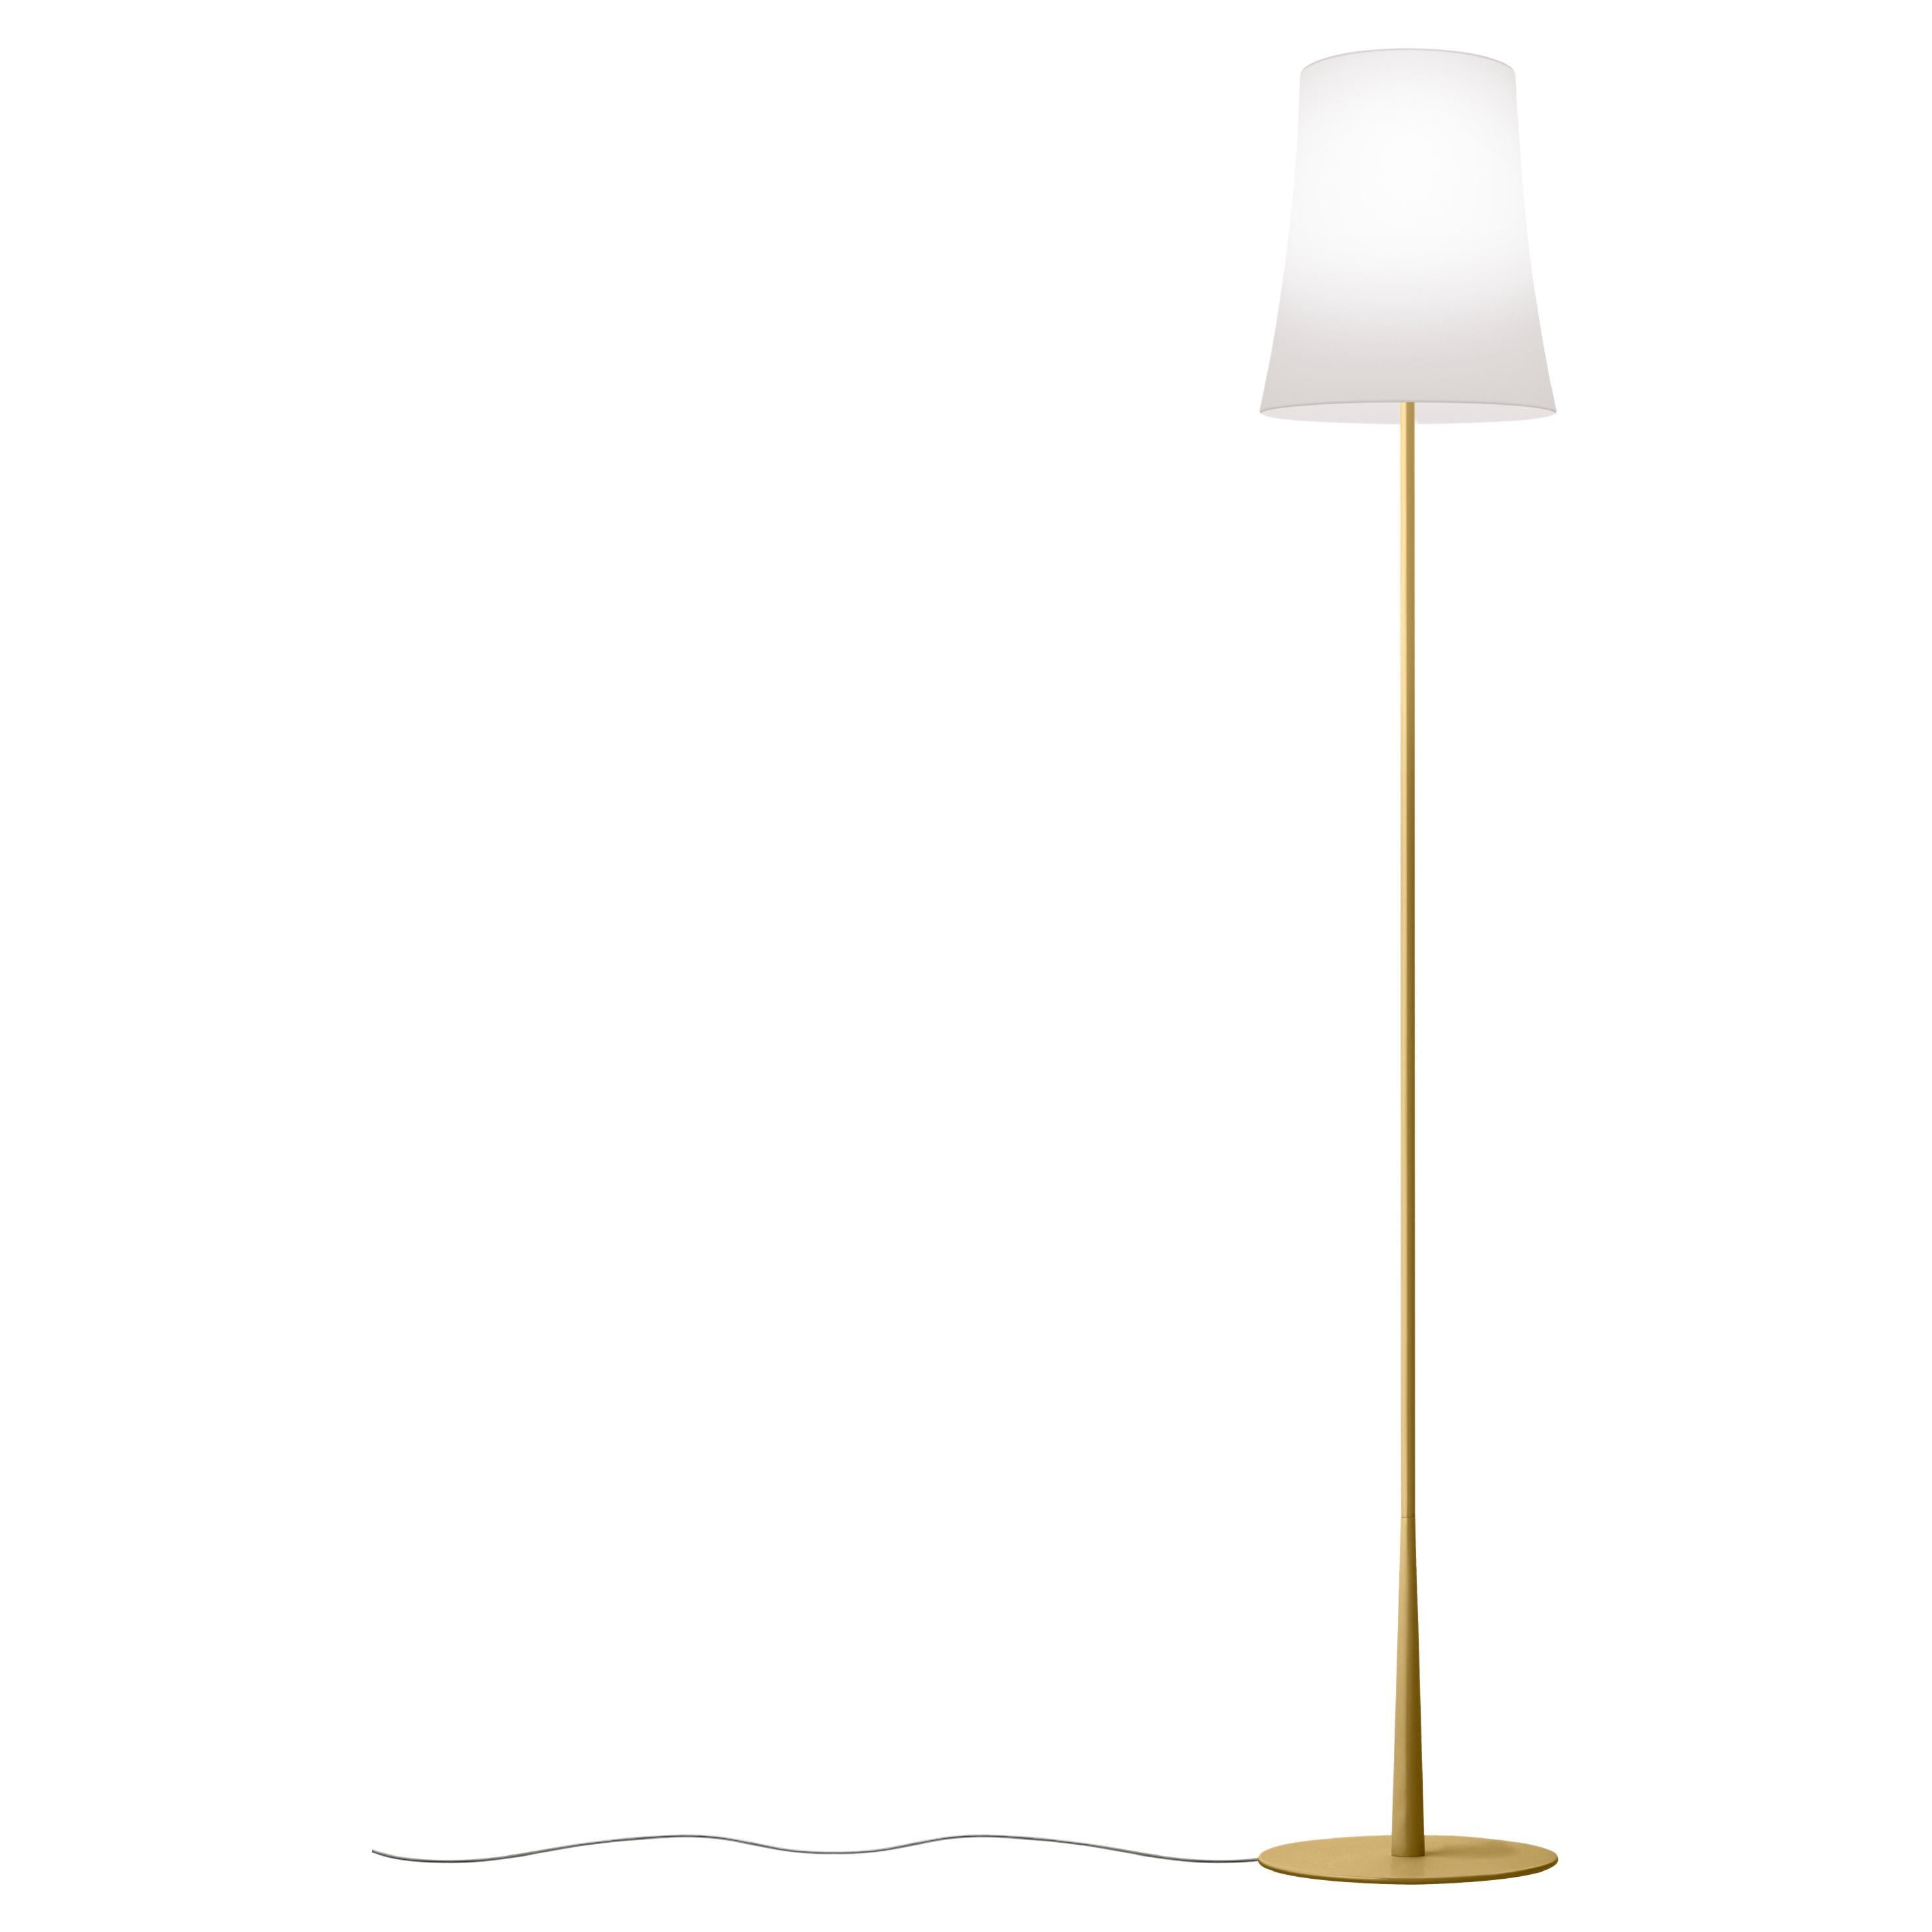 Foscarini Birdie Easy Floor Lamp in Sand Yellow by Ludovica & Roberto Palomba For Sale